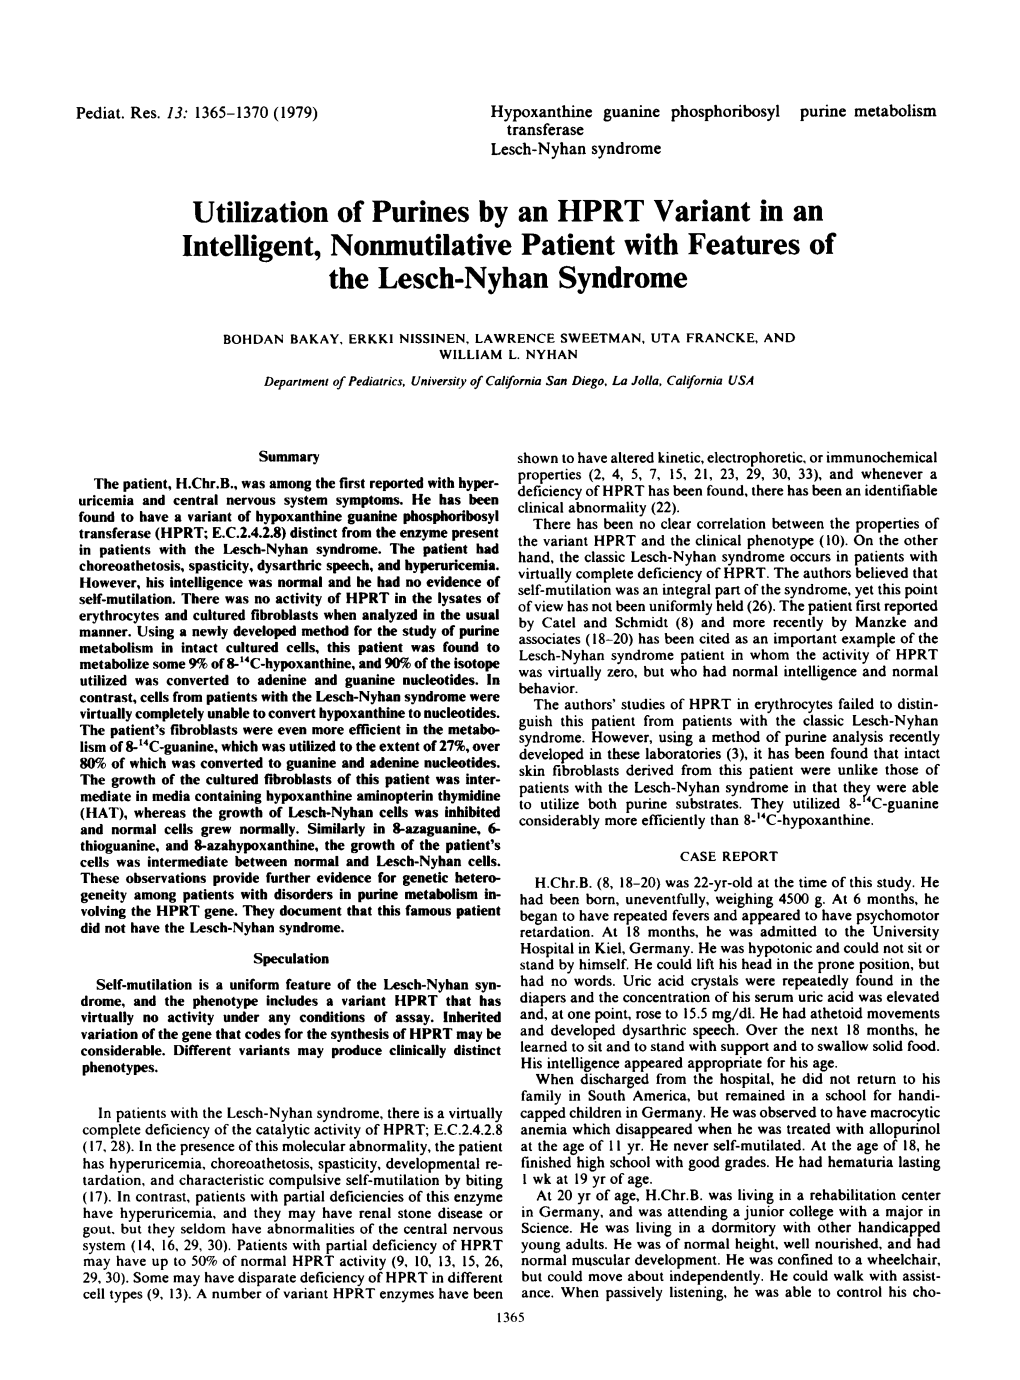 Utilization of Purines by an HPRT Variant in an Intelligent, Nonmutilative Patient with Features of the Lesch-Nyhan Syndrome